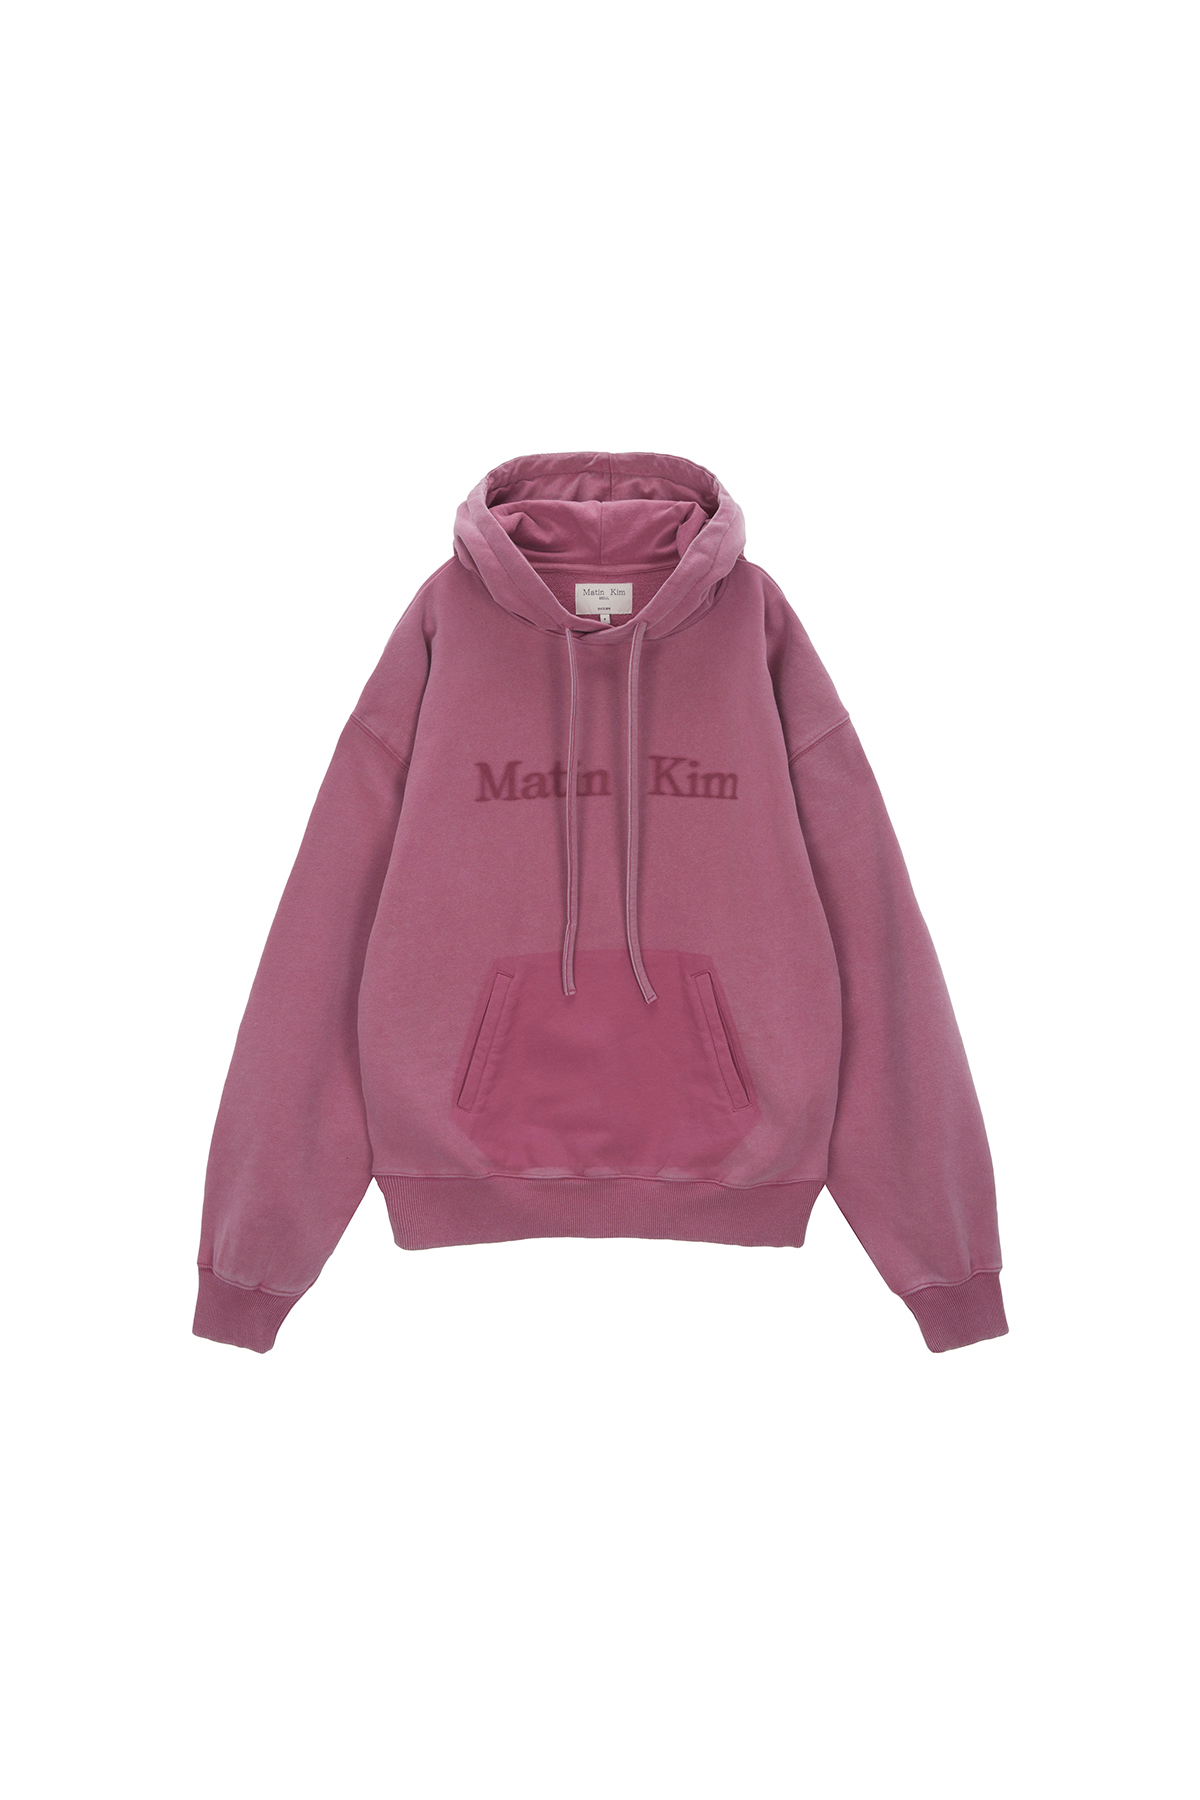 PIGMENT DYING LOGO HOODY IN PINK